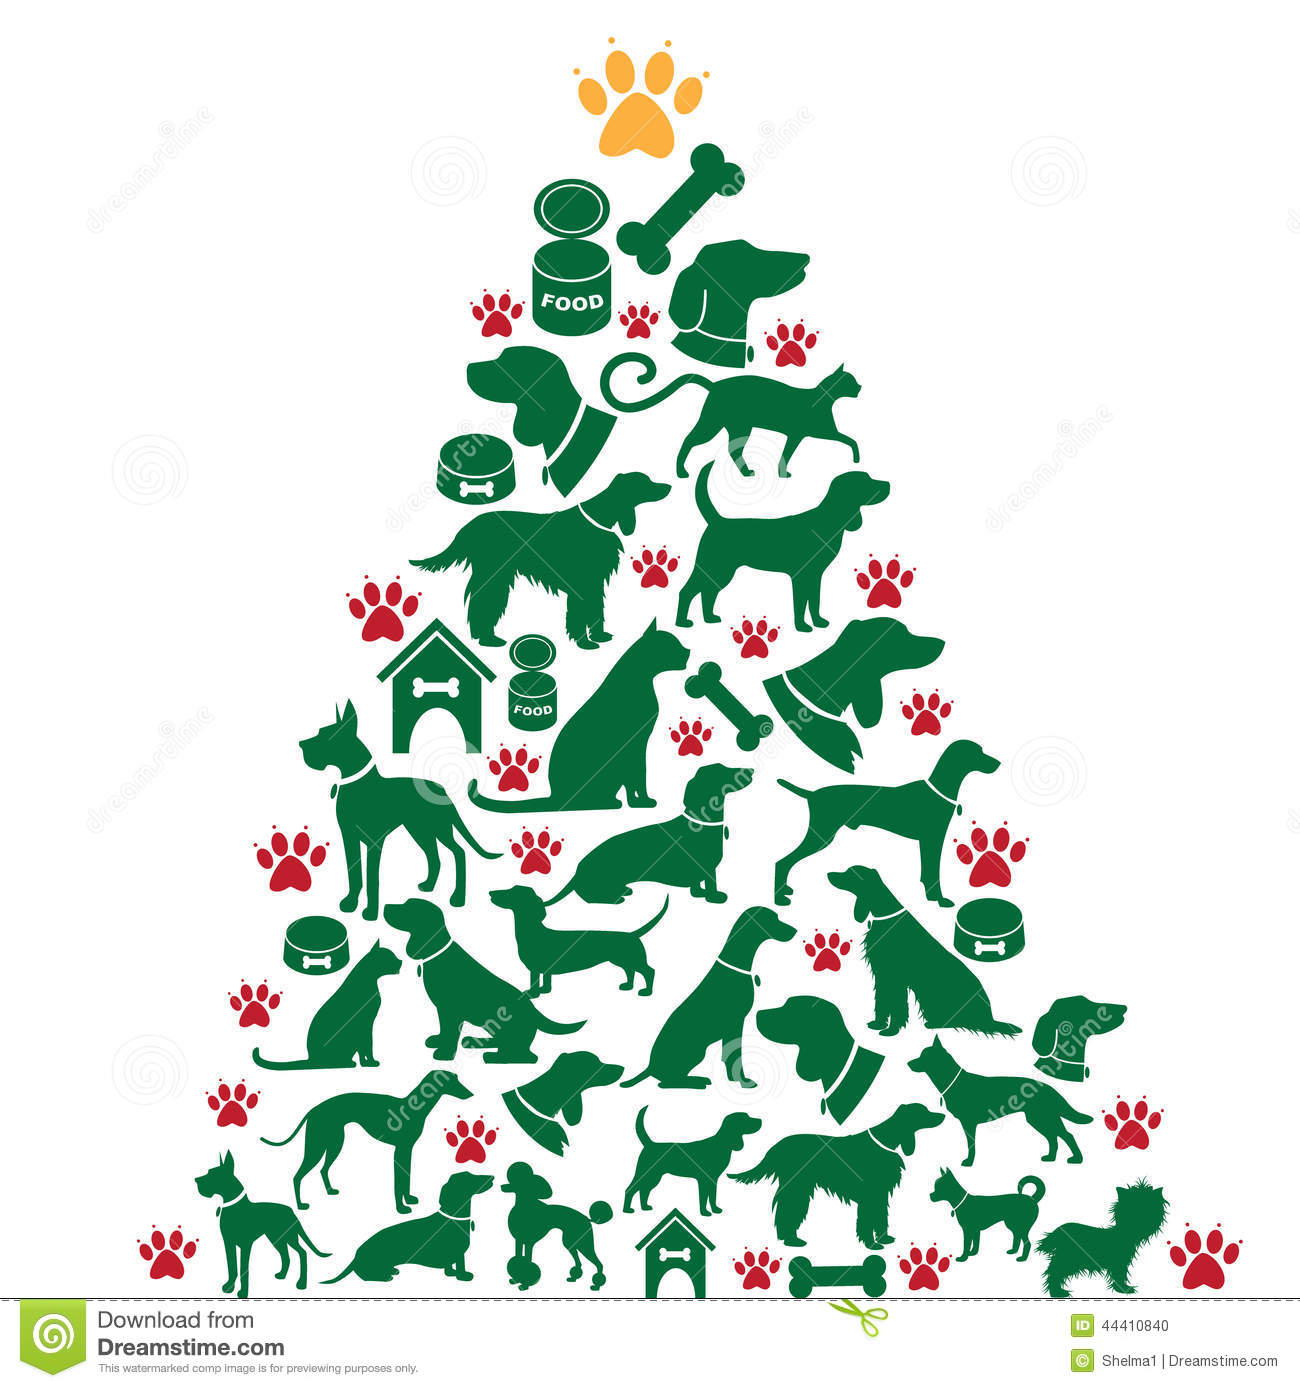 Cartoon Dogs And Cats Christmas Tree Stock Vector   Image  44410840